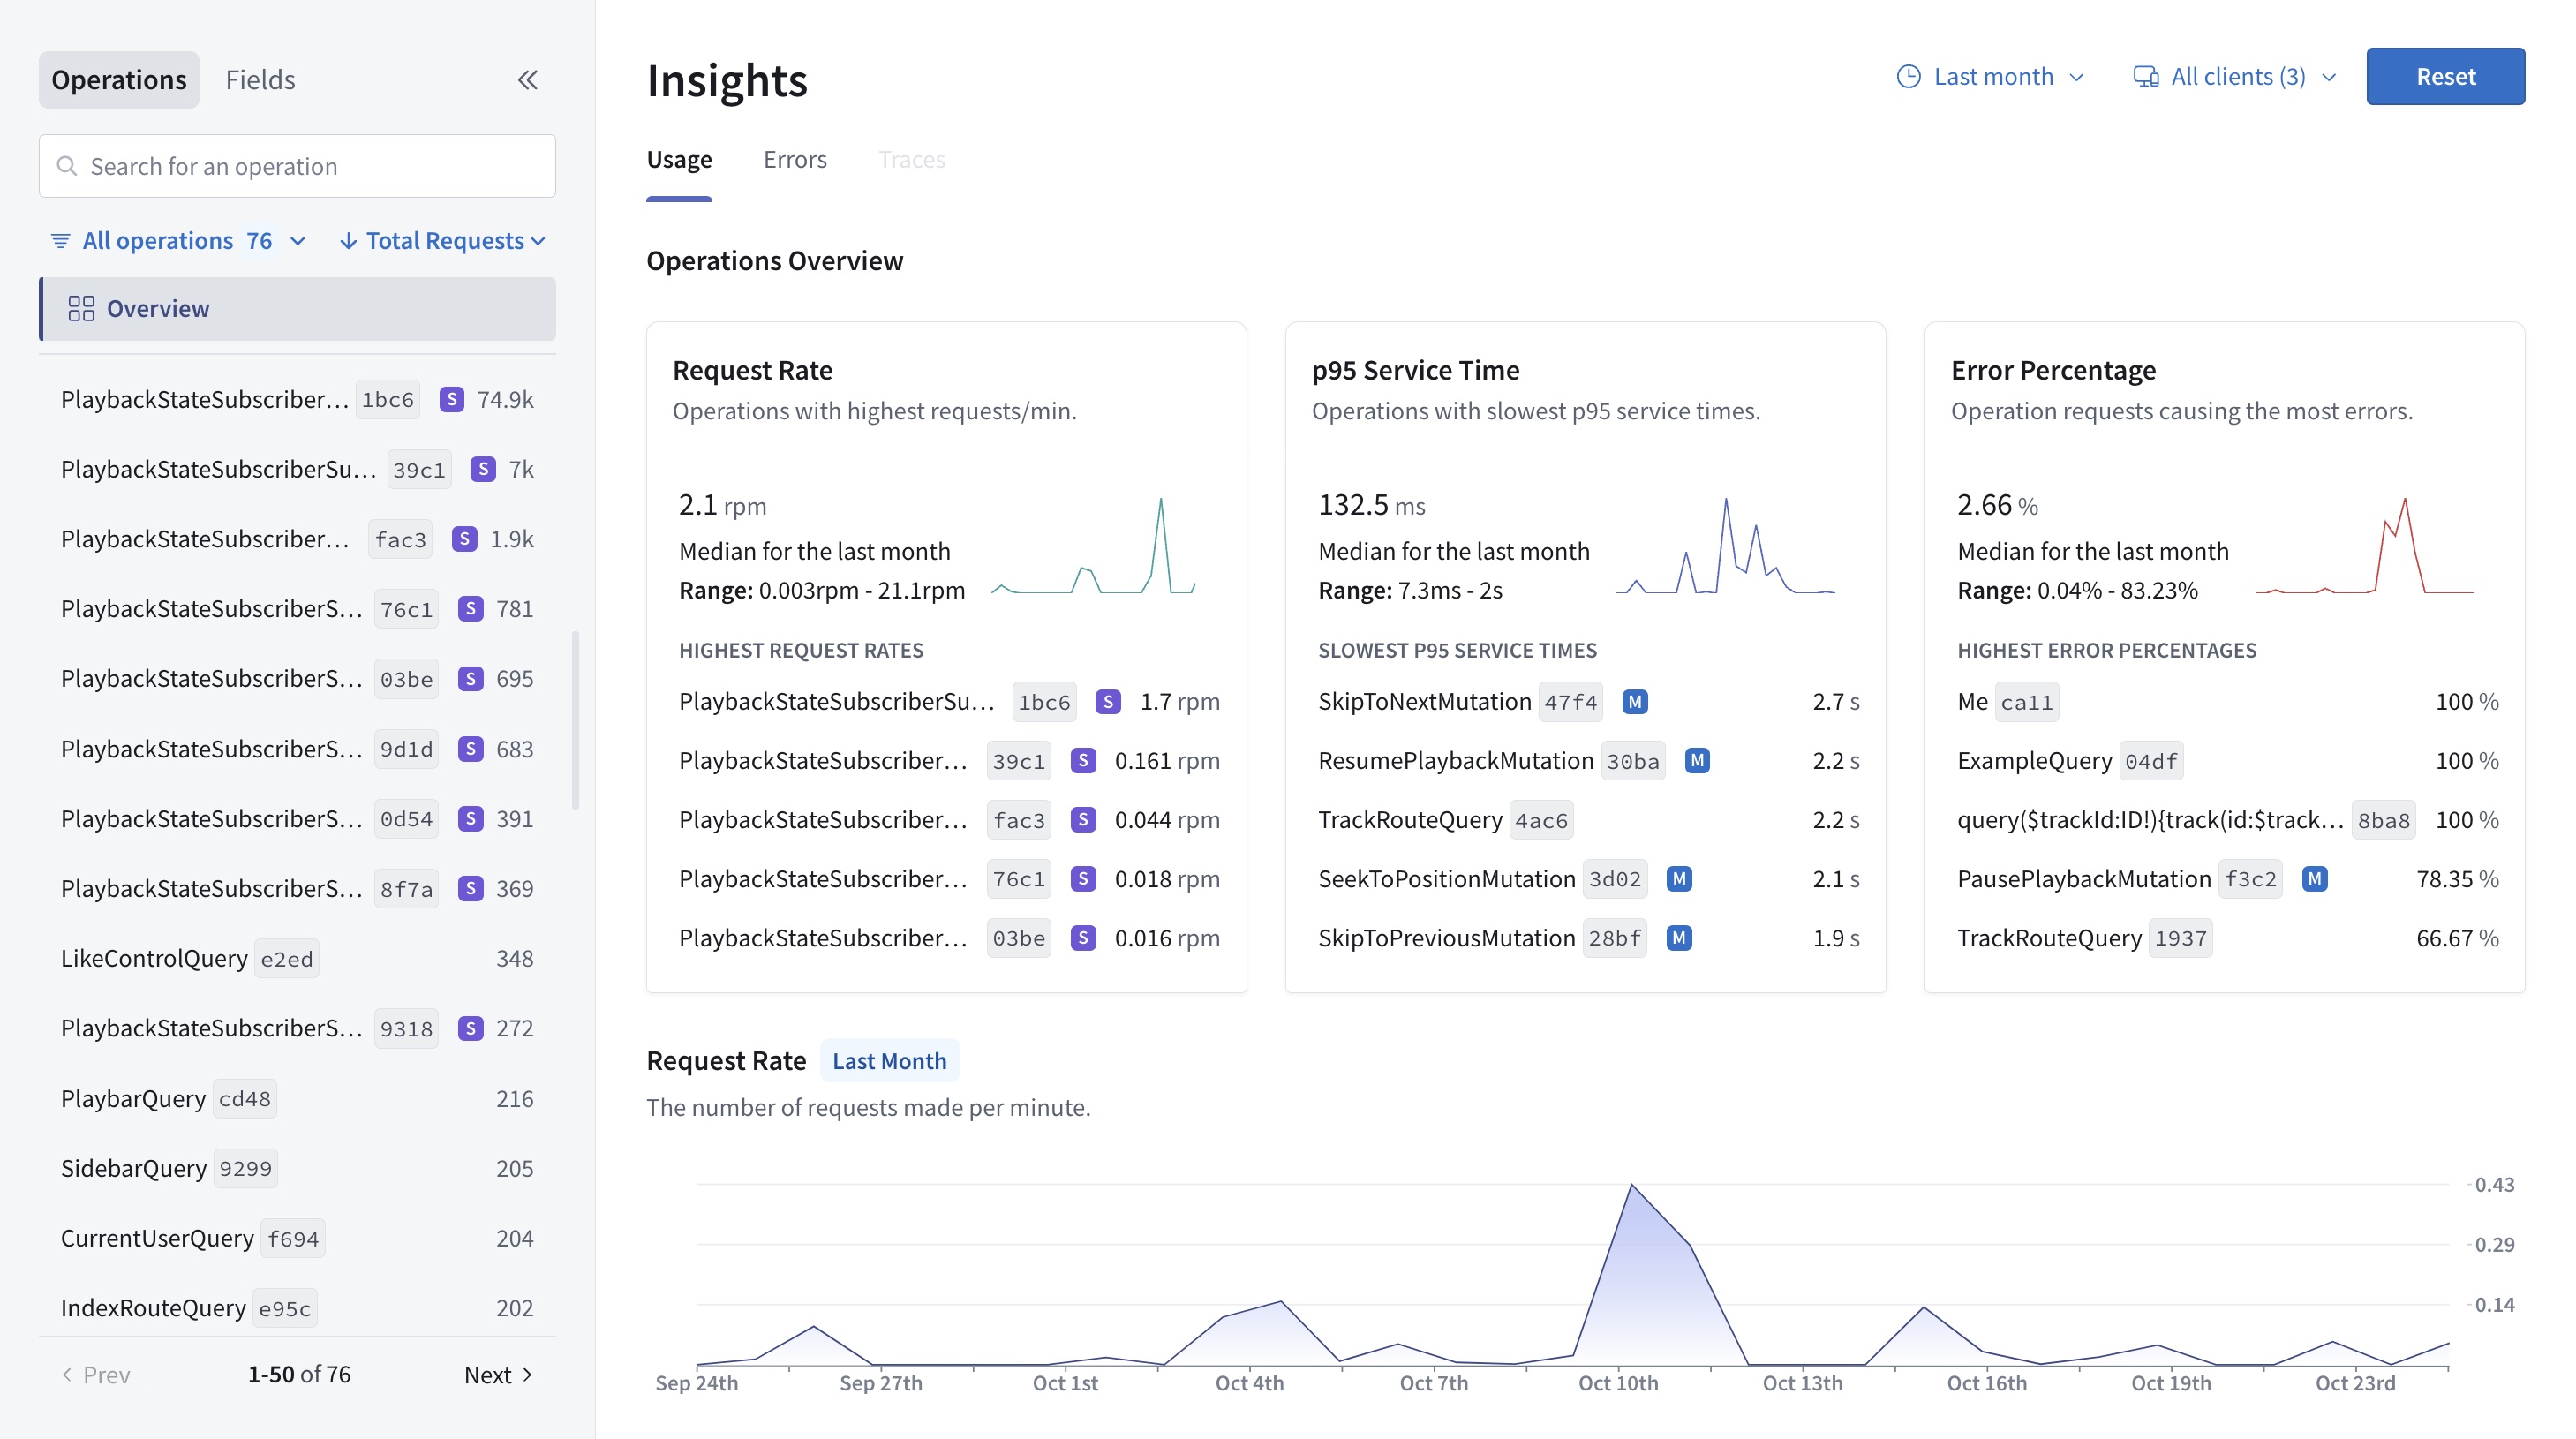 The Insights page in GraphOS Studio, showing metrics for operations and their fields